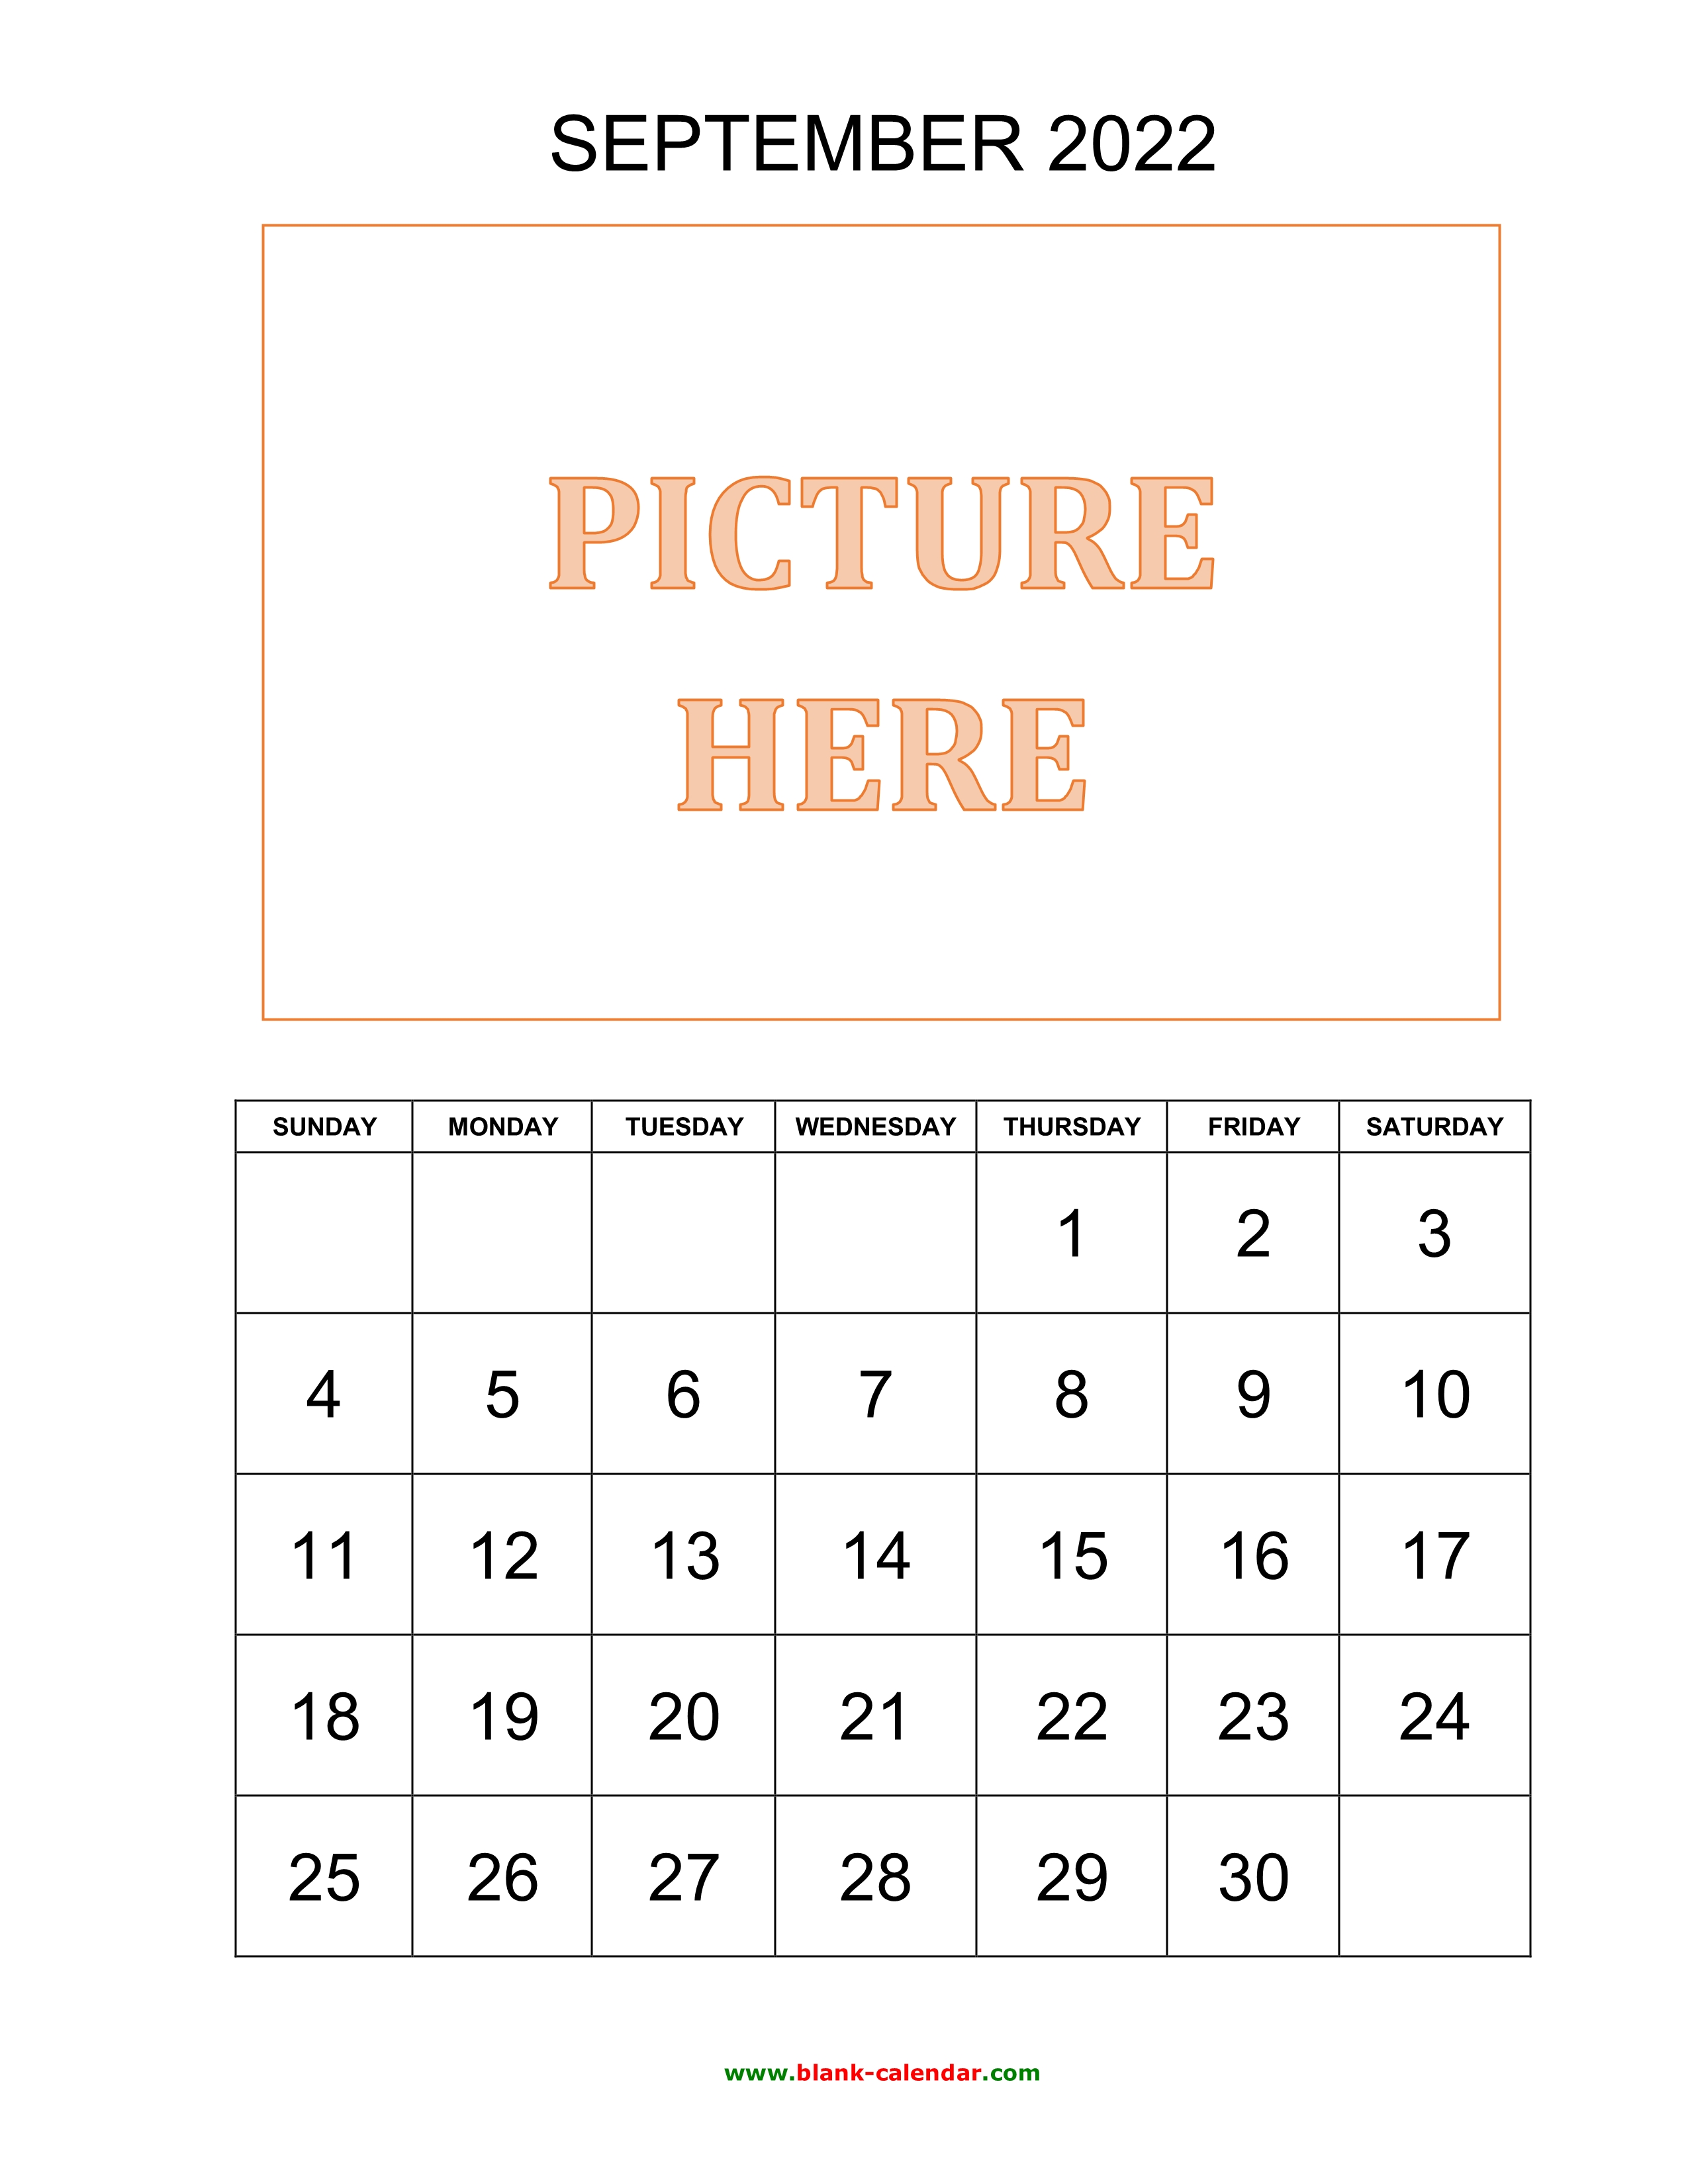 Free Download Printable September 2022 Calendar, Pictures Can Be Placed At The Top